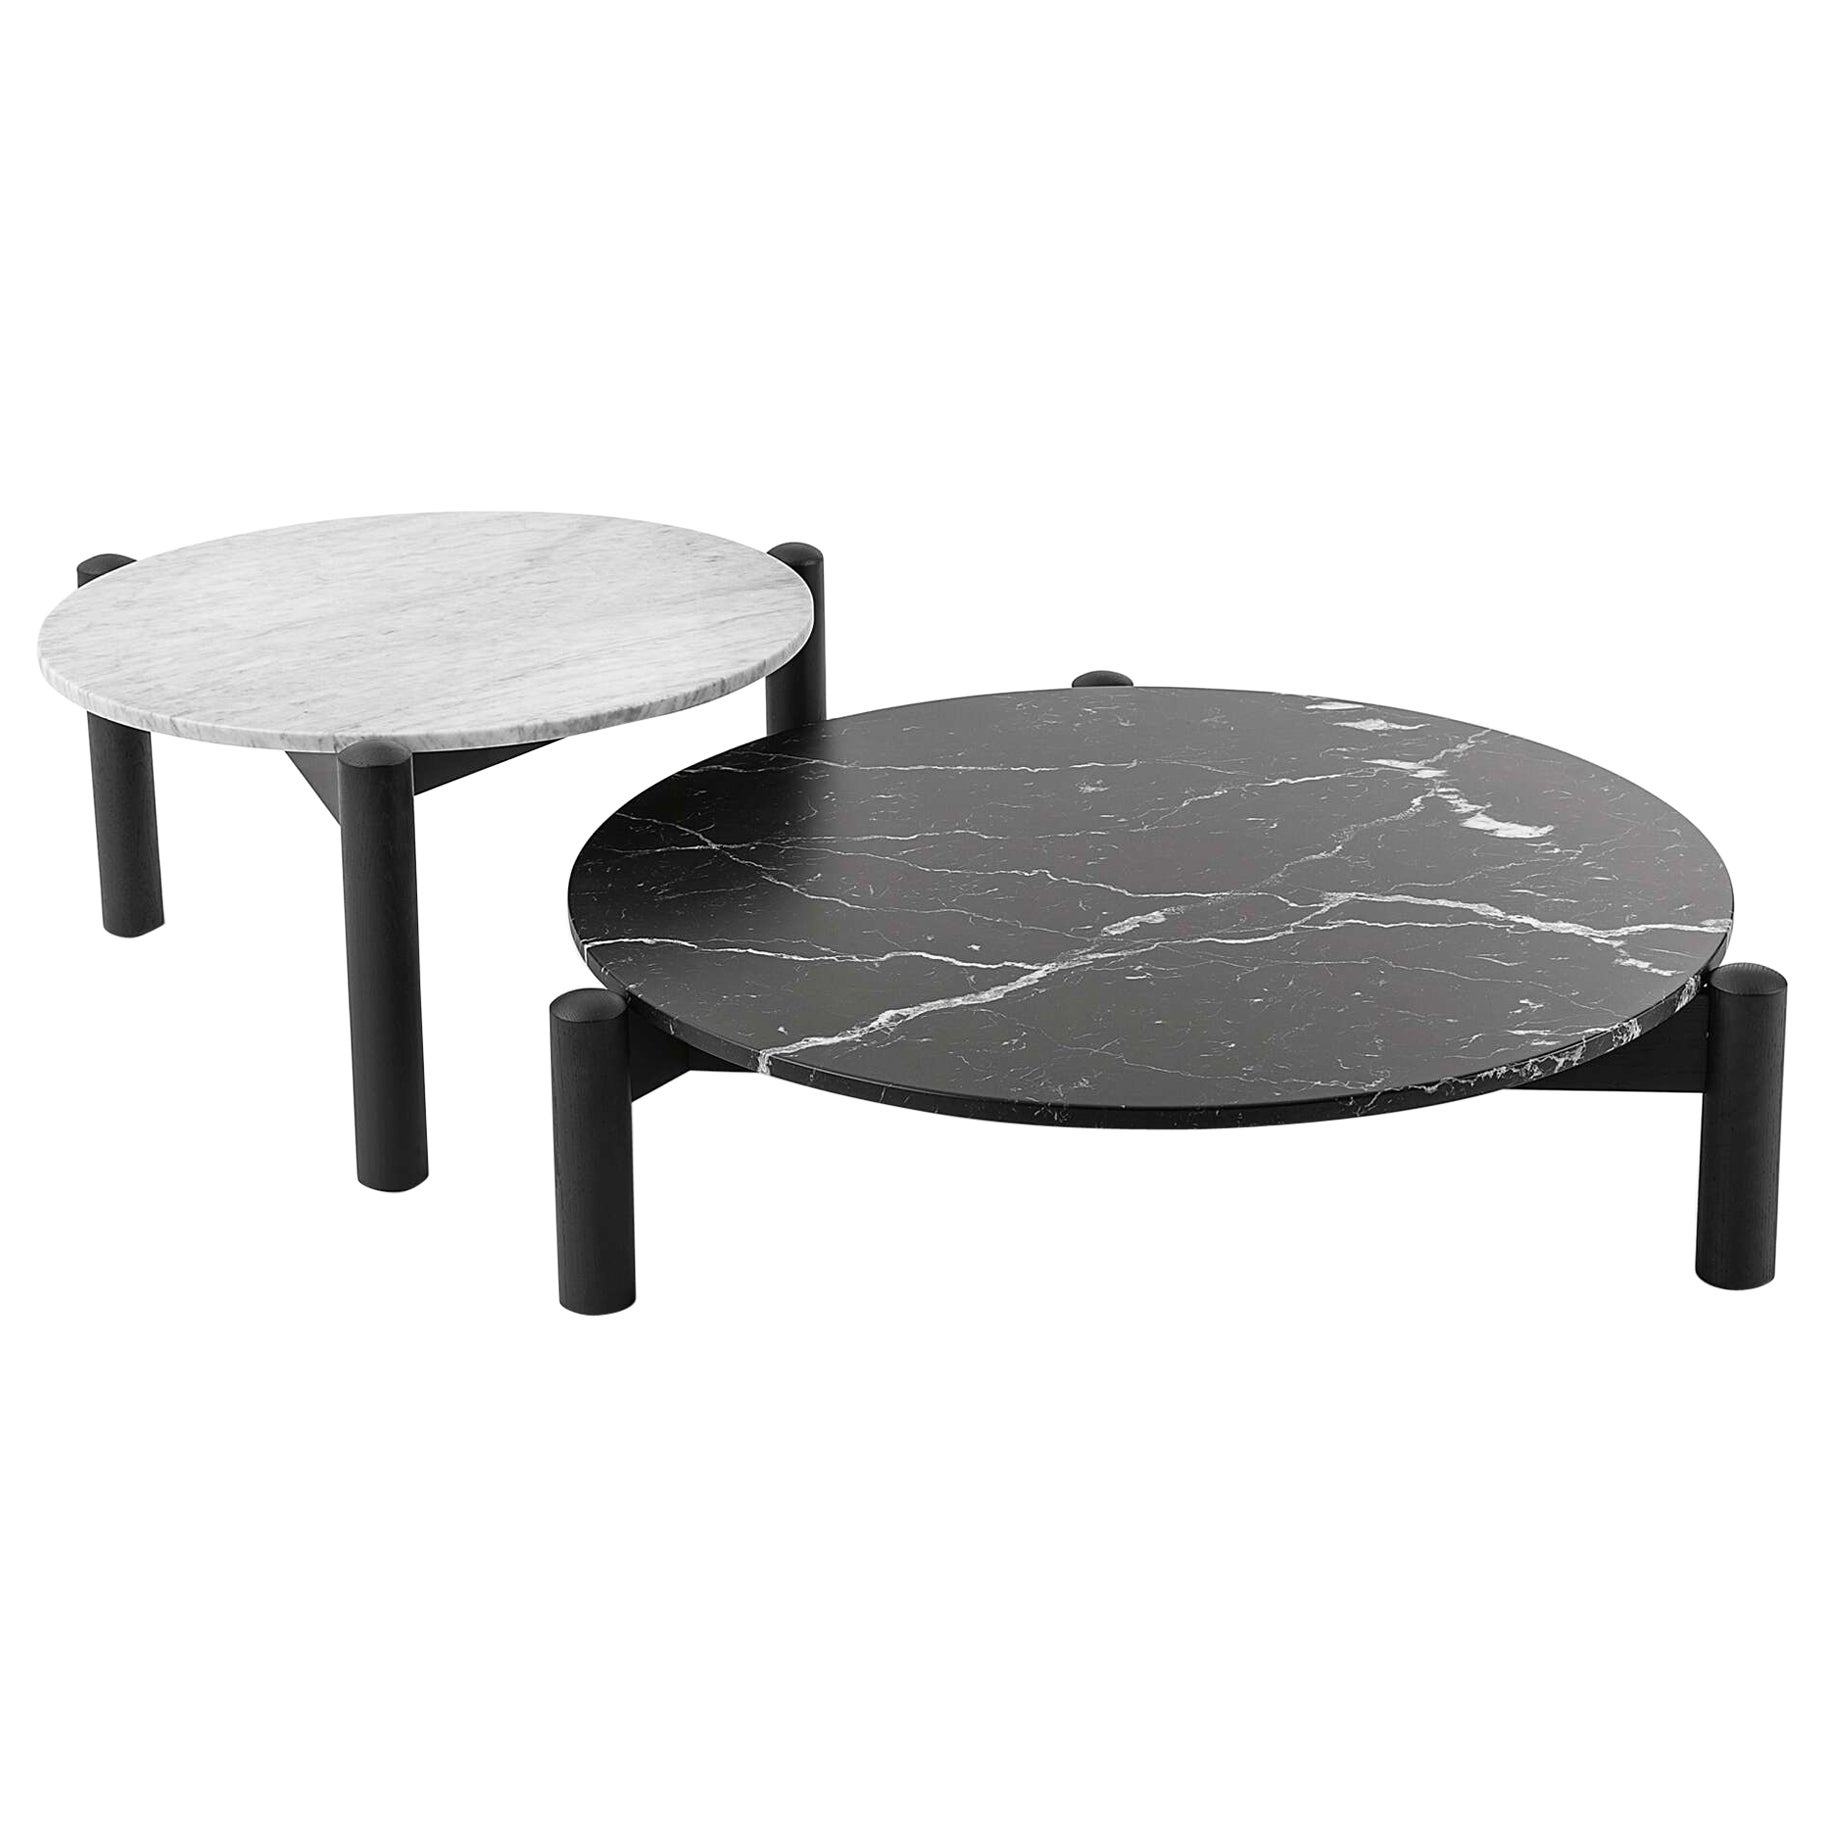 Charlotte Perriand Table À Plateau Interchangeable for Cassina, Italy, new